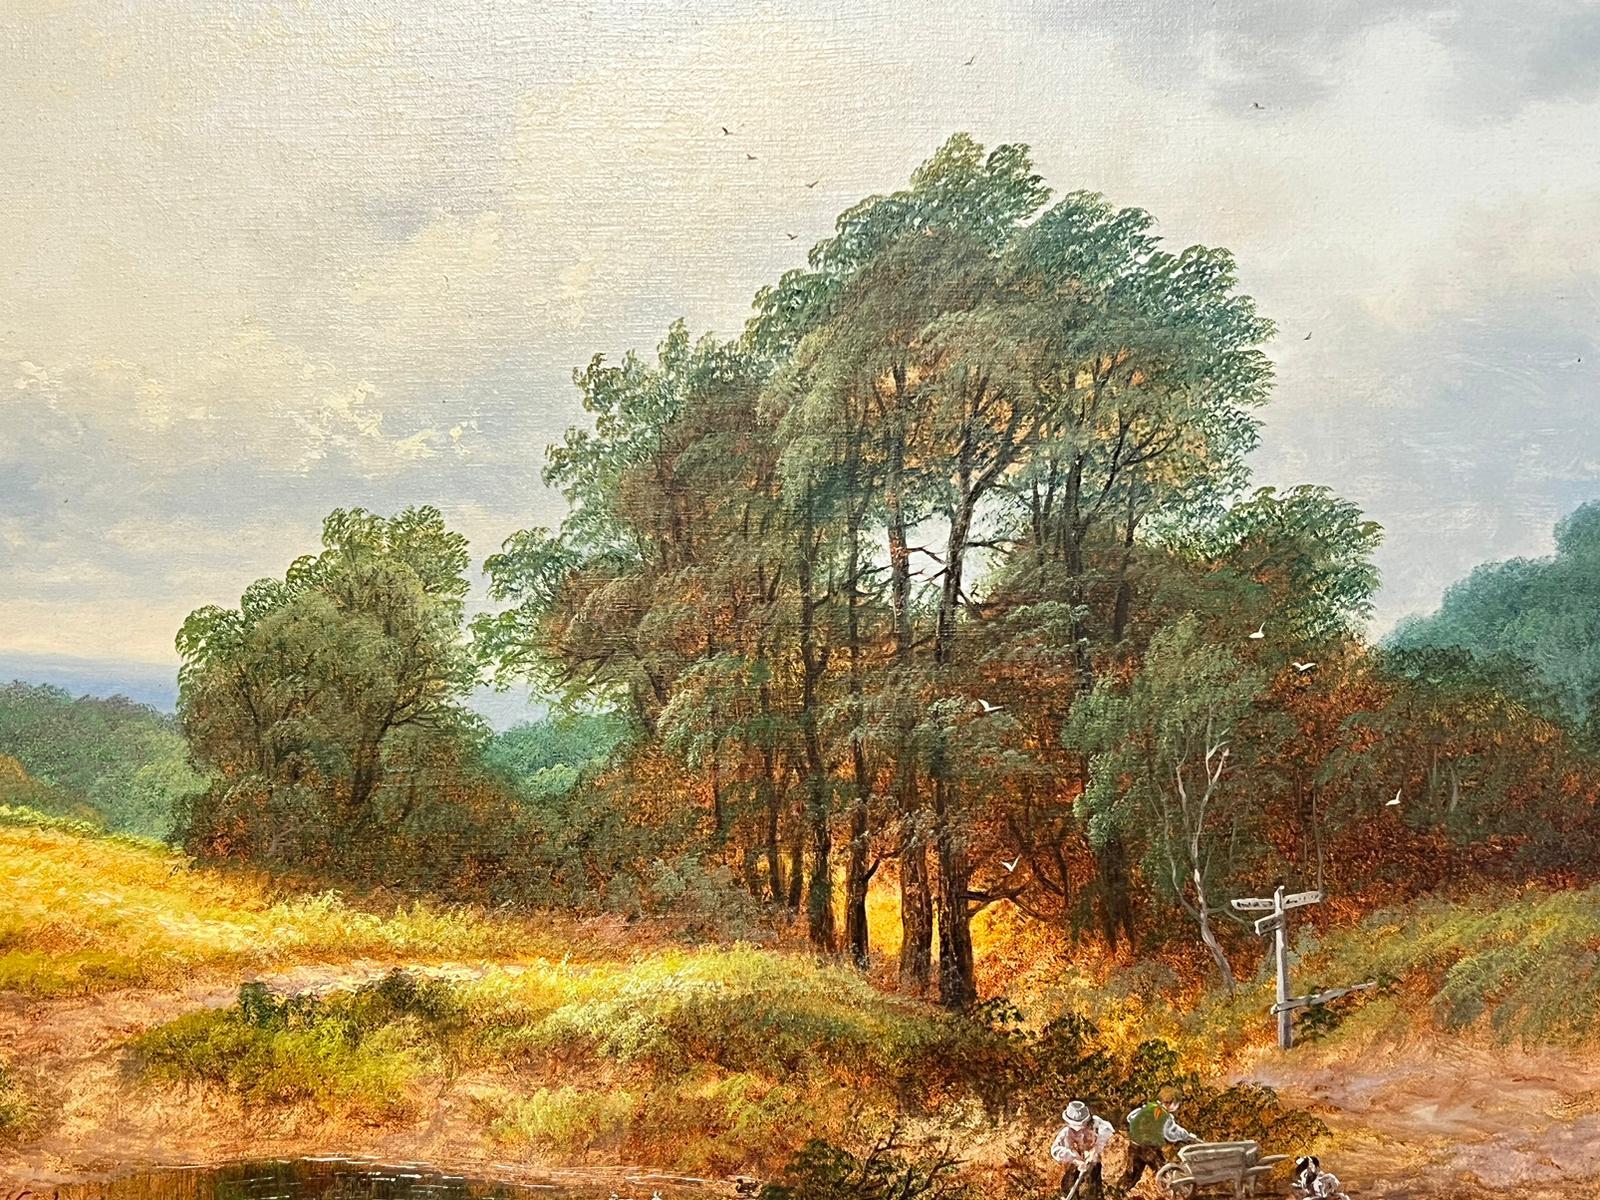 Country Landscape Scene With Figures
Andrew Grant- Curtis (20th Century British working in the Victorian style)
signed oil painting on canvas, framed
framed: 19 x 23 inches
canvas: 14 x 18 inches
provenance: private collection, England
condition: